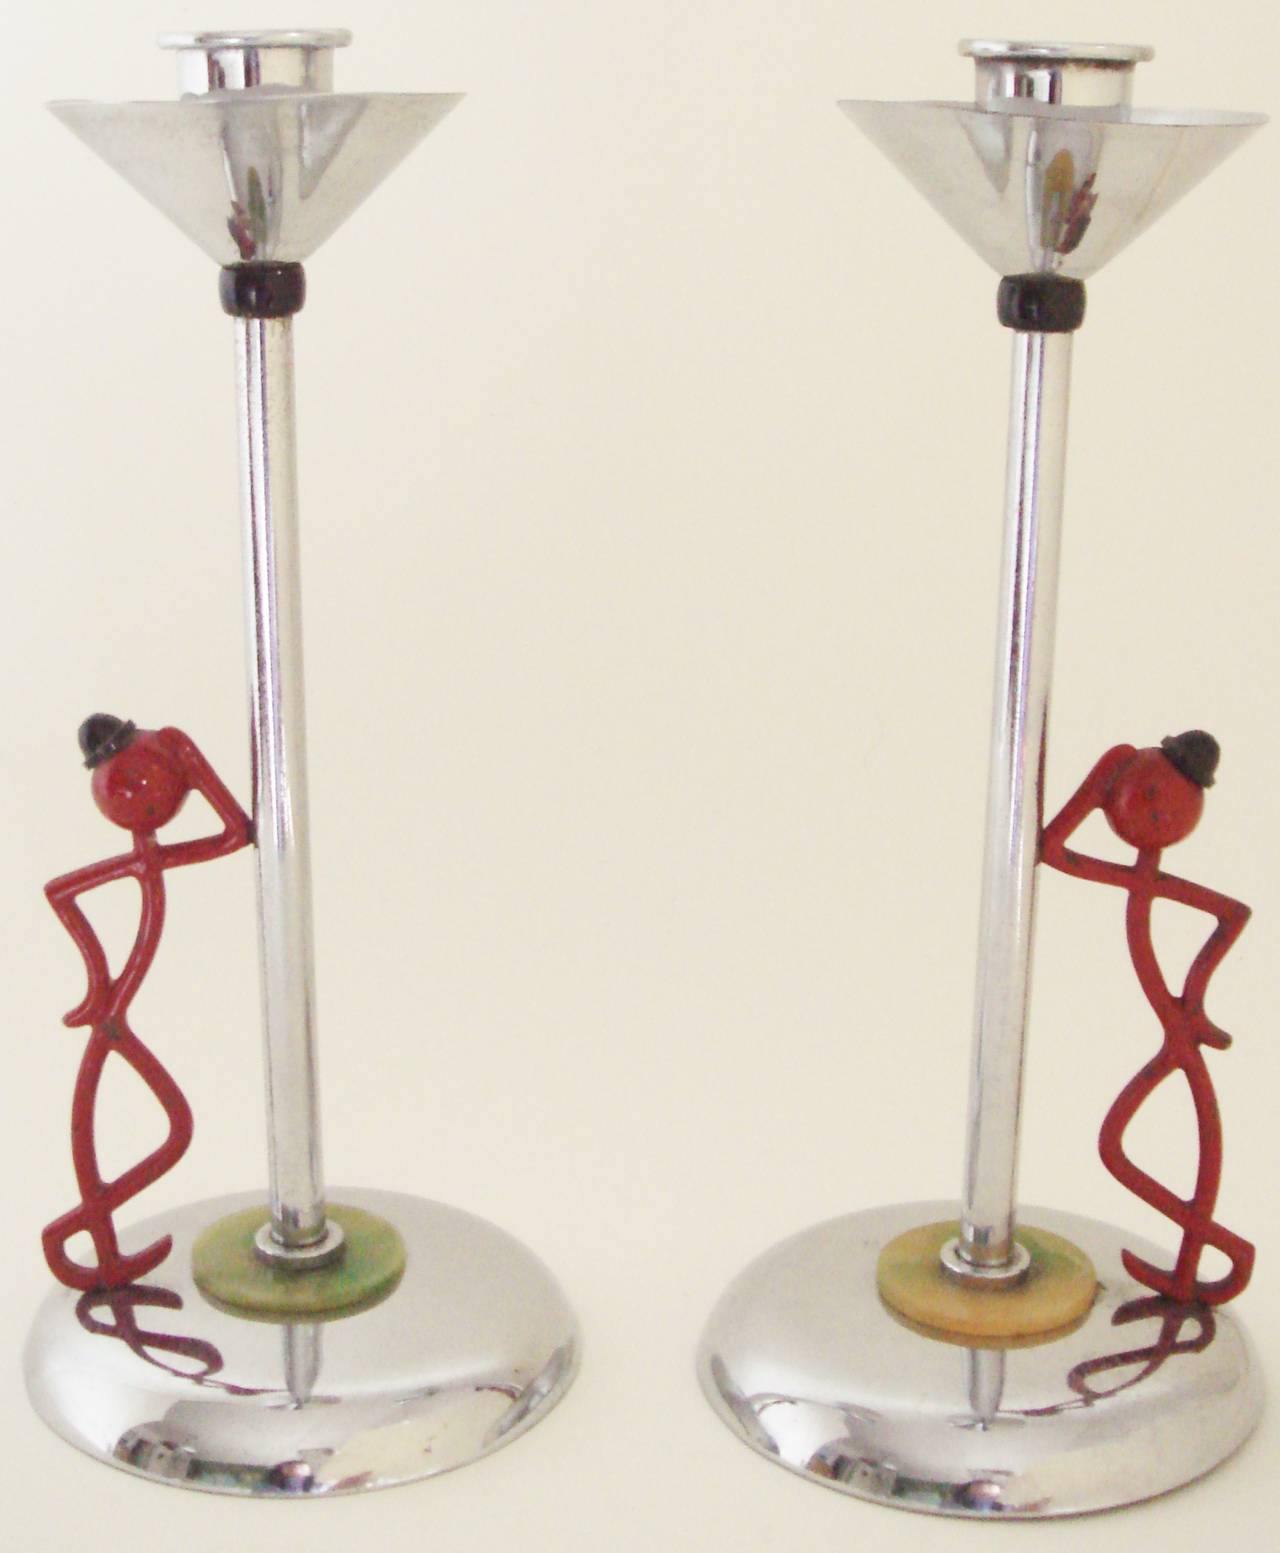 This fun and rare pair of English Art Deco chrome plated candlesticks are accented with green marbled Bakelite discs at the base and feature a cheeky red enamelled stick figure (the design of which is attributed to Hagenauer for GEC) sporting a